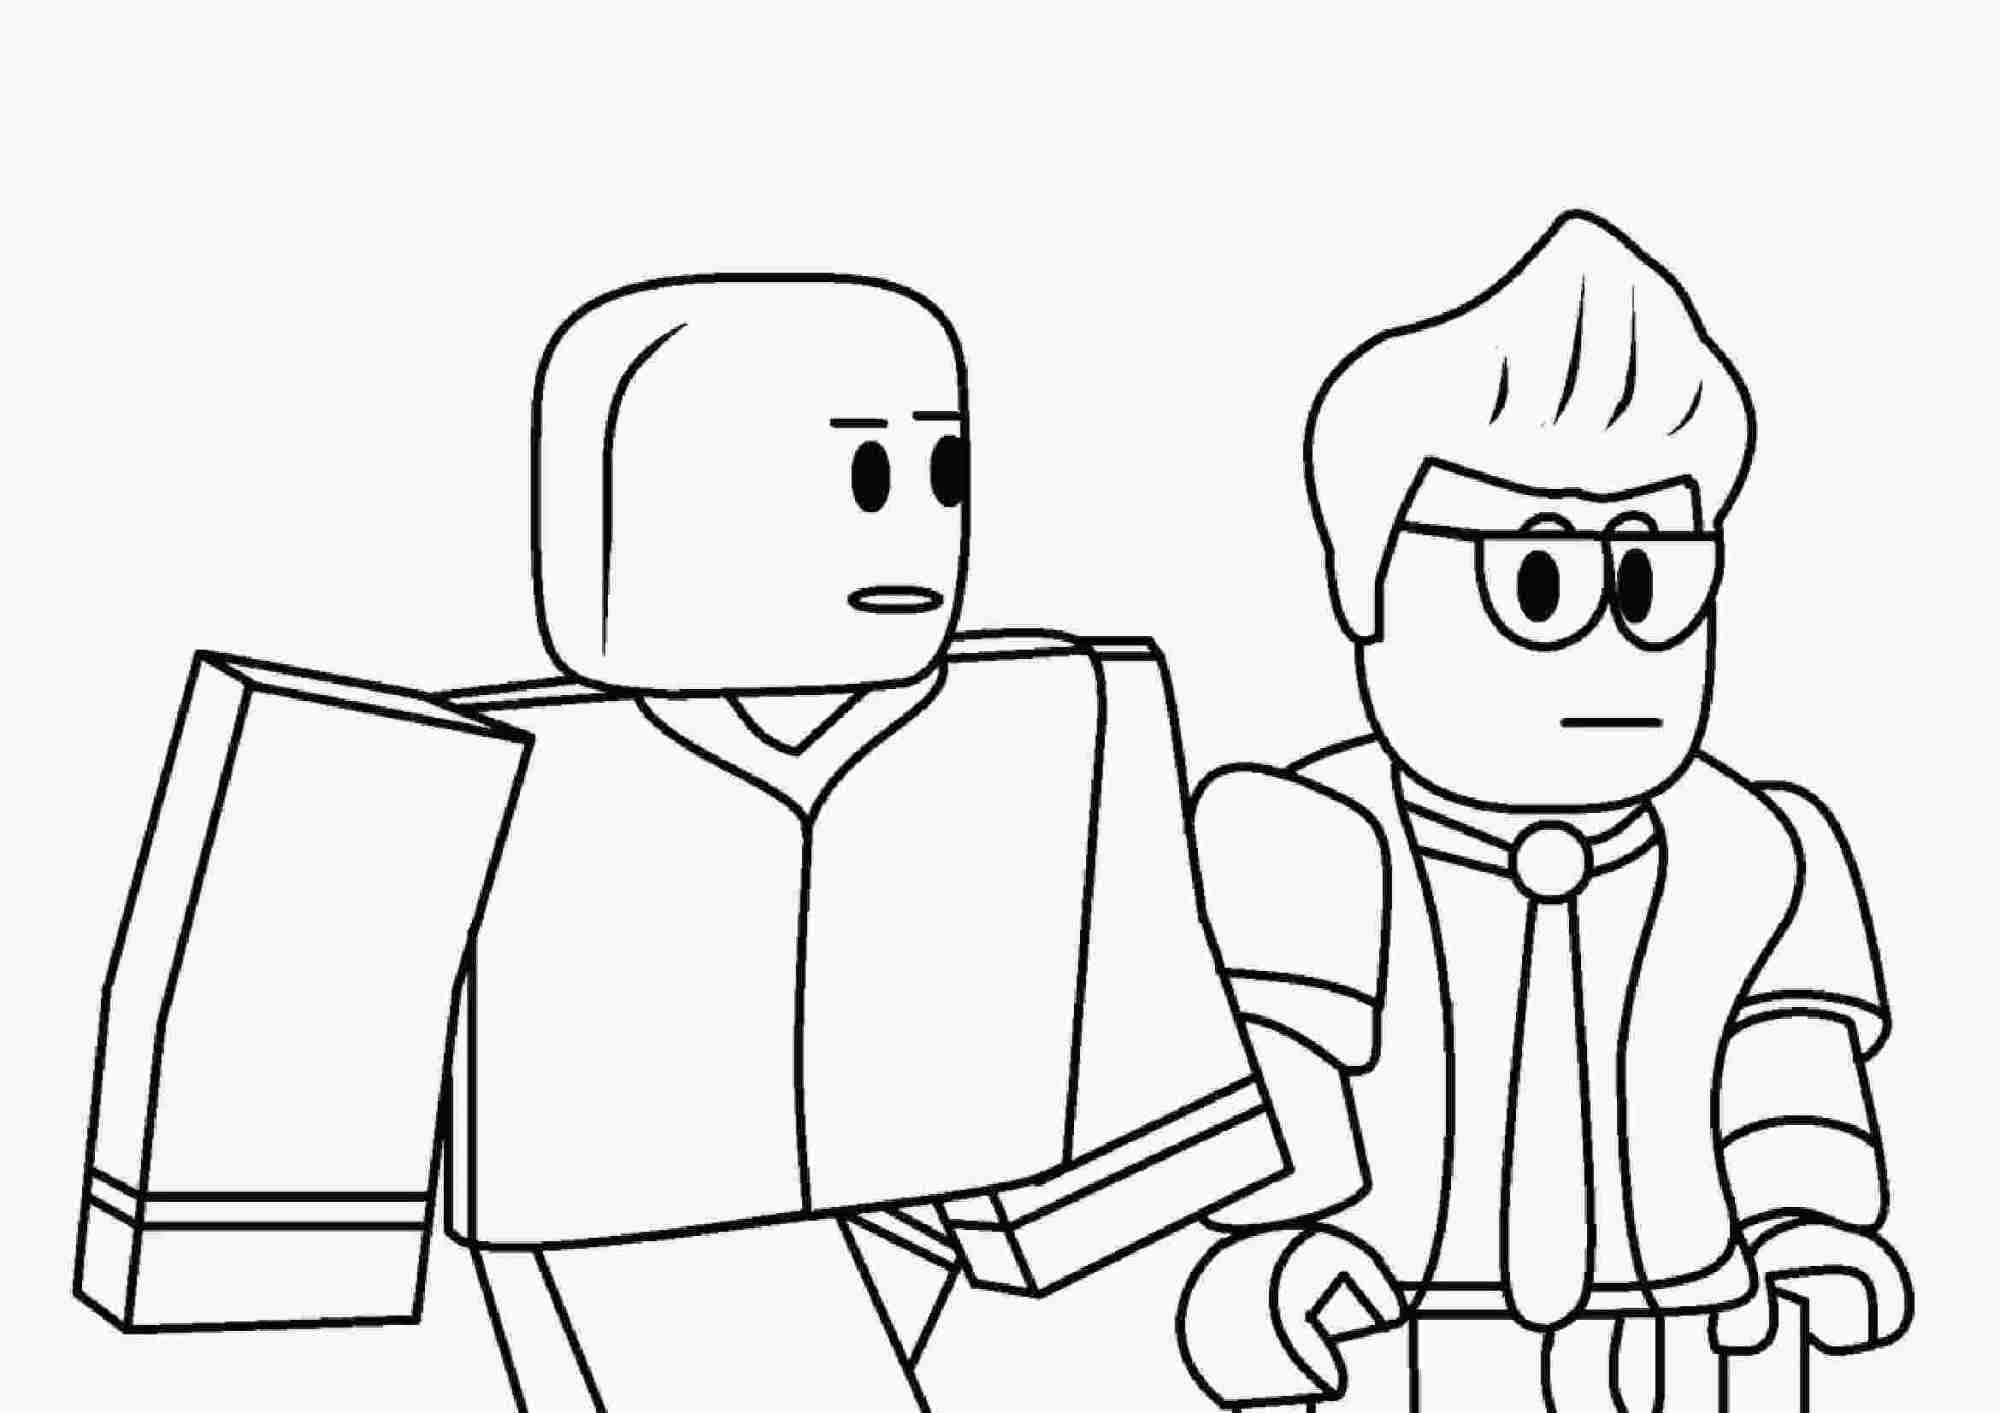 Roblox Noob and Businessman walk around Coloring Pages - Lego Coloring Pages  - Coloring Pages For Kids And Adults